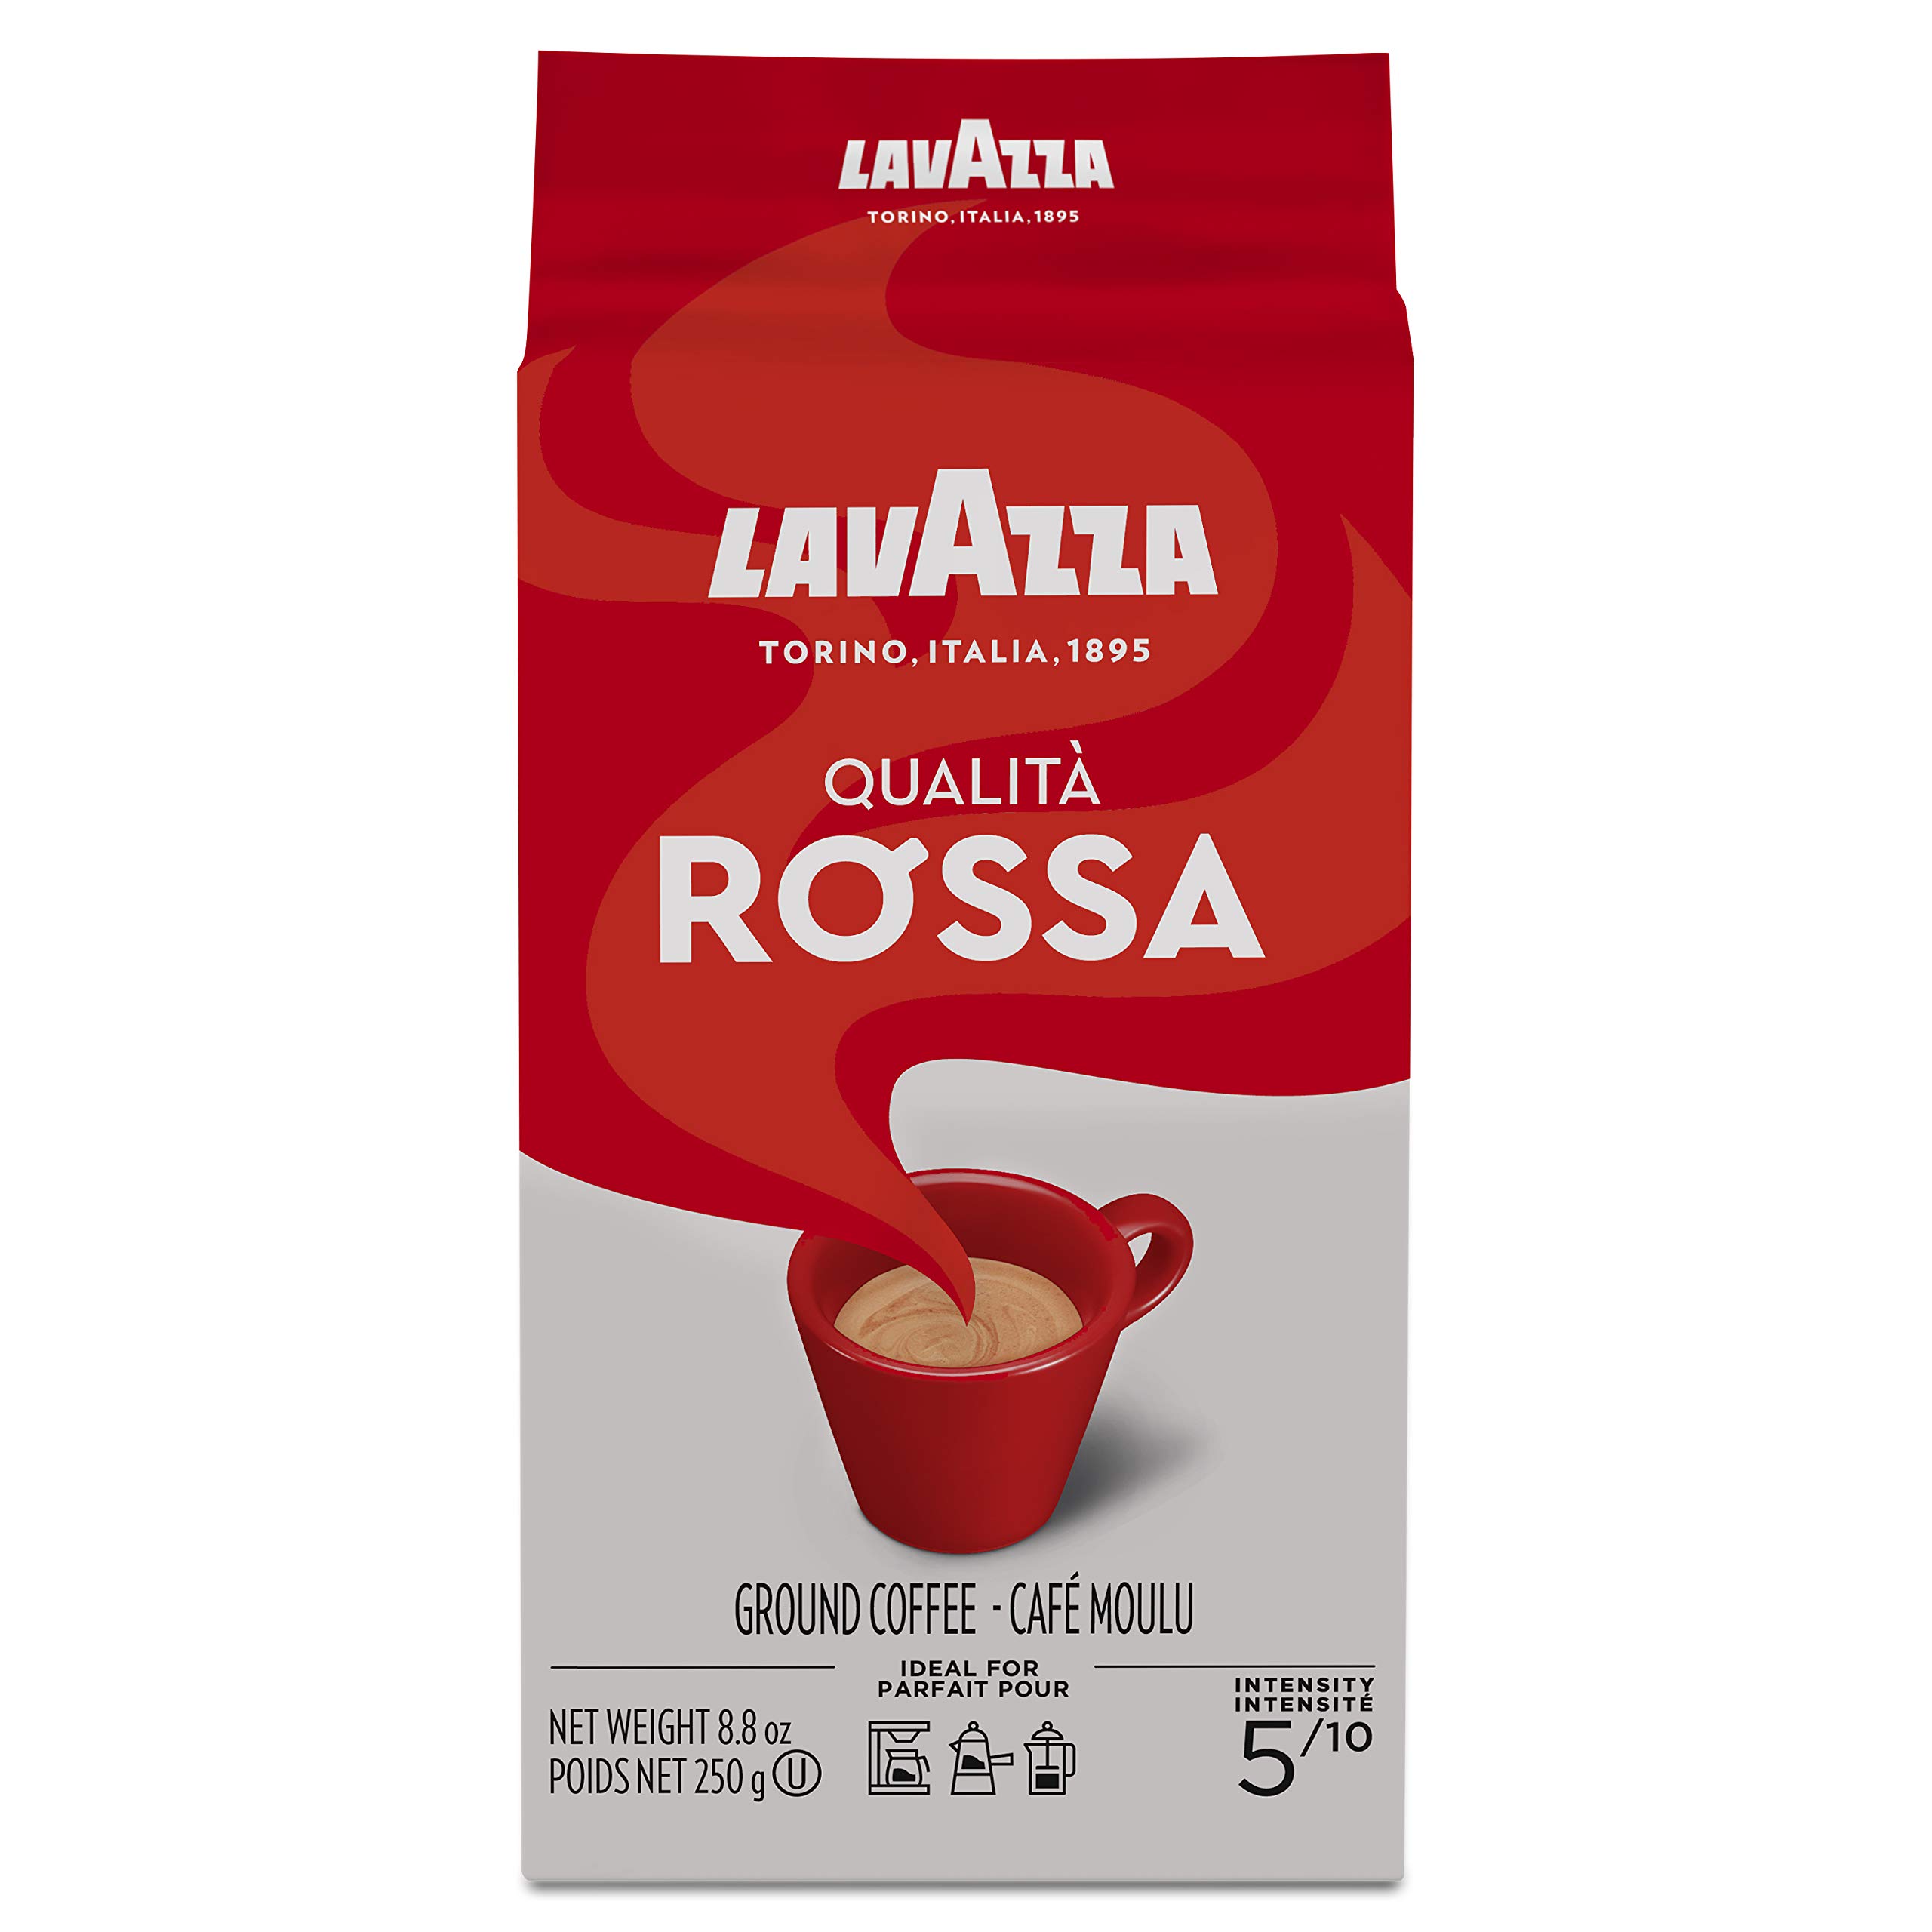 Lavazza Qualita Rossa Ground Coffee 4 packs x 8.8ounce (2lbs+) $12.00 or $10.20 at 15% Subscribe and Save - $25% clickable coupon Amazon Prime $9 or $7.65